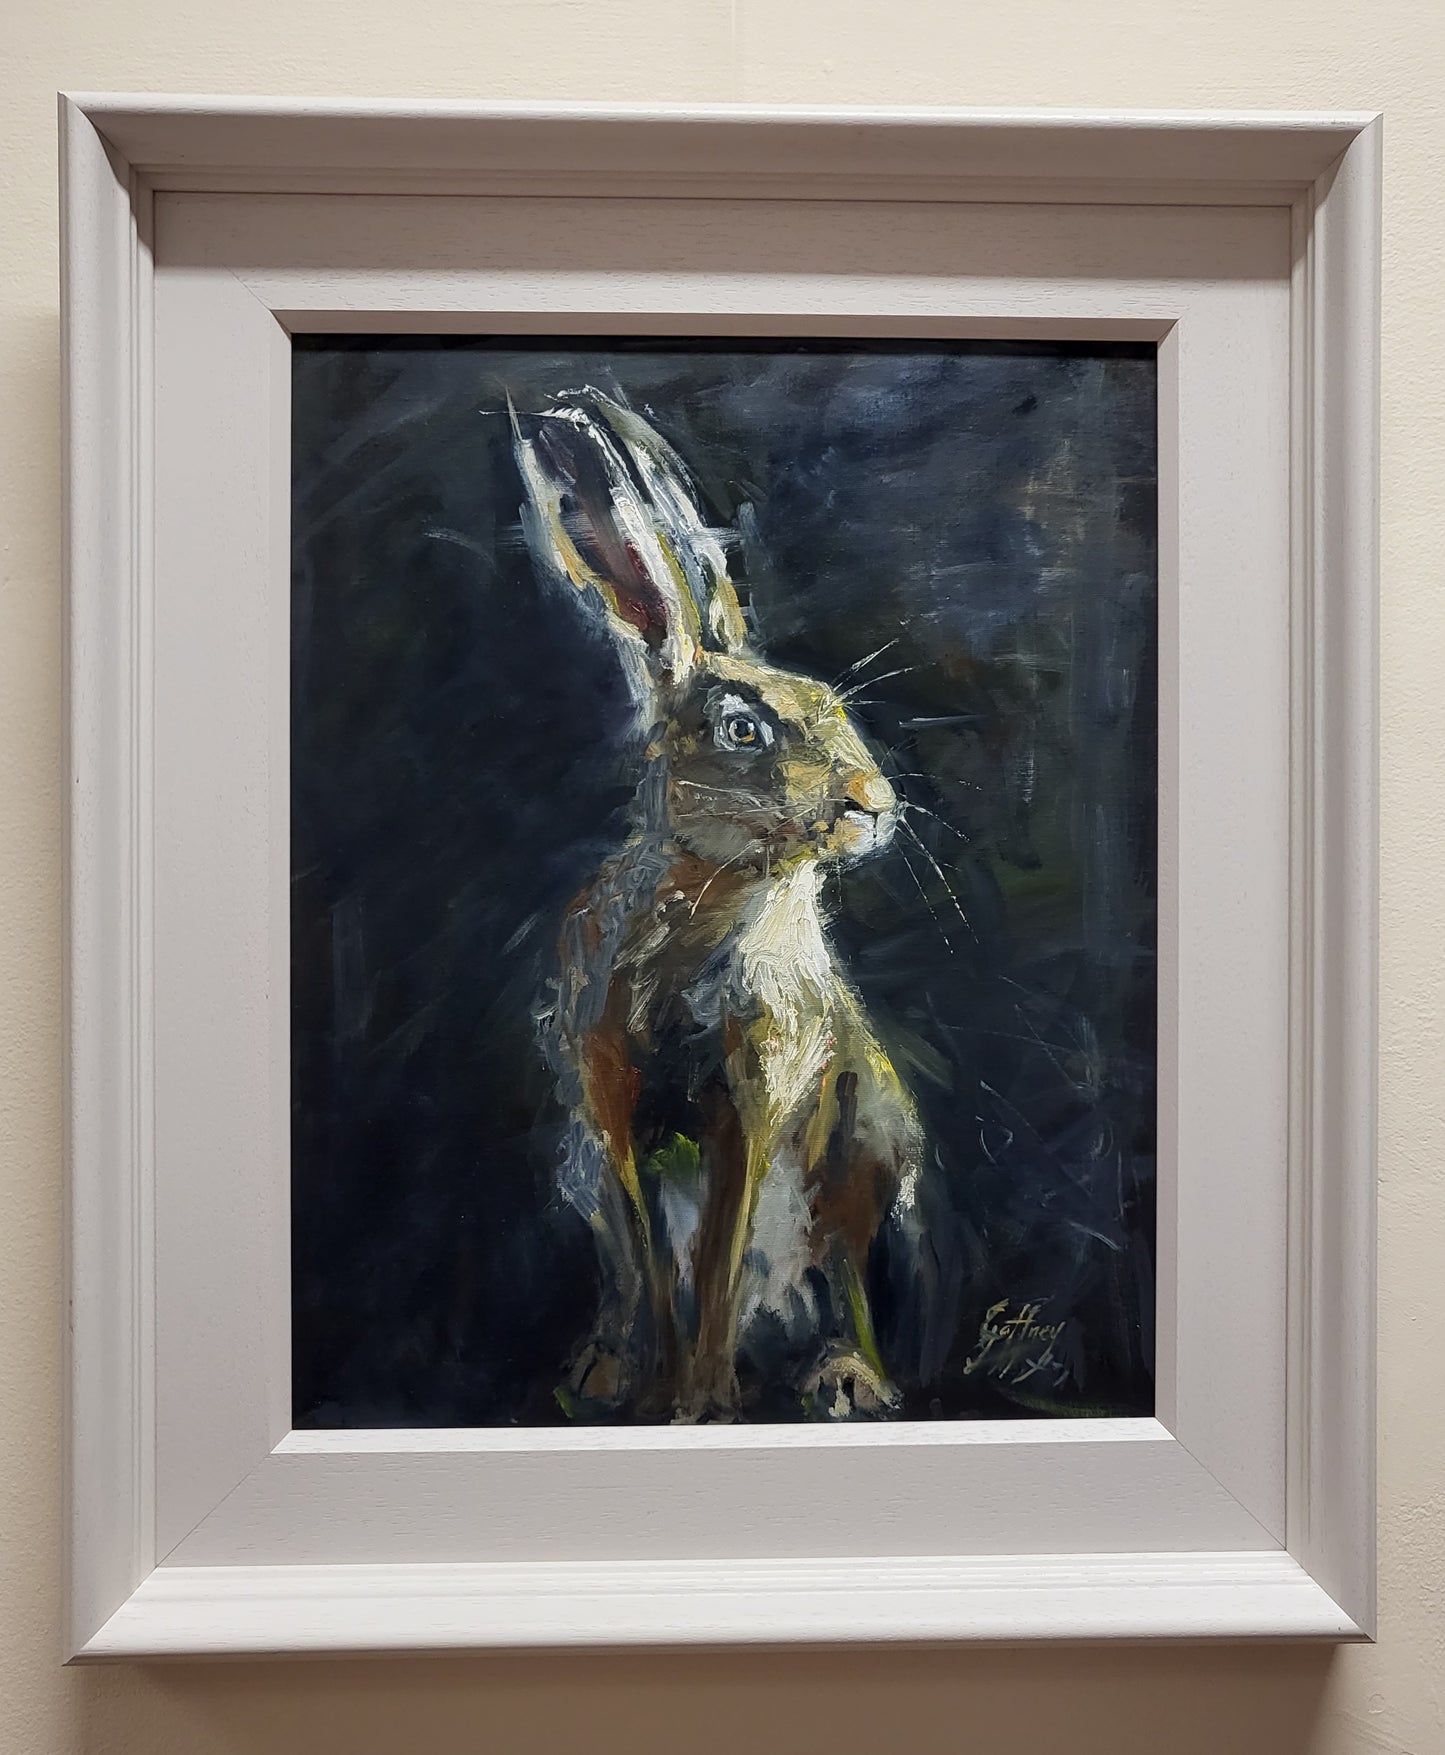 The Moonlit Hare